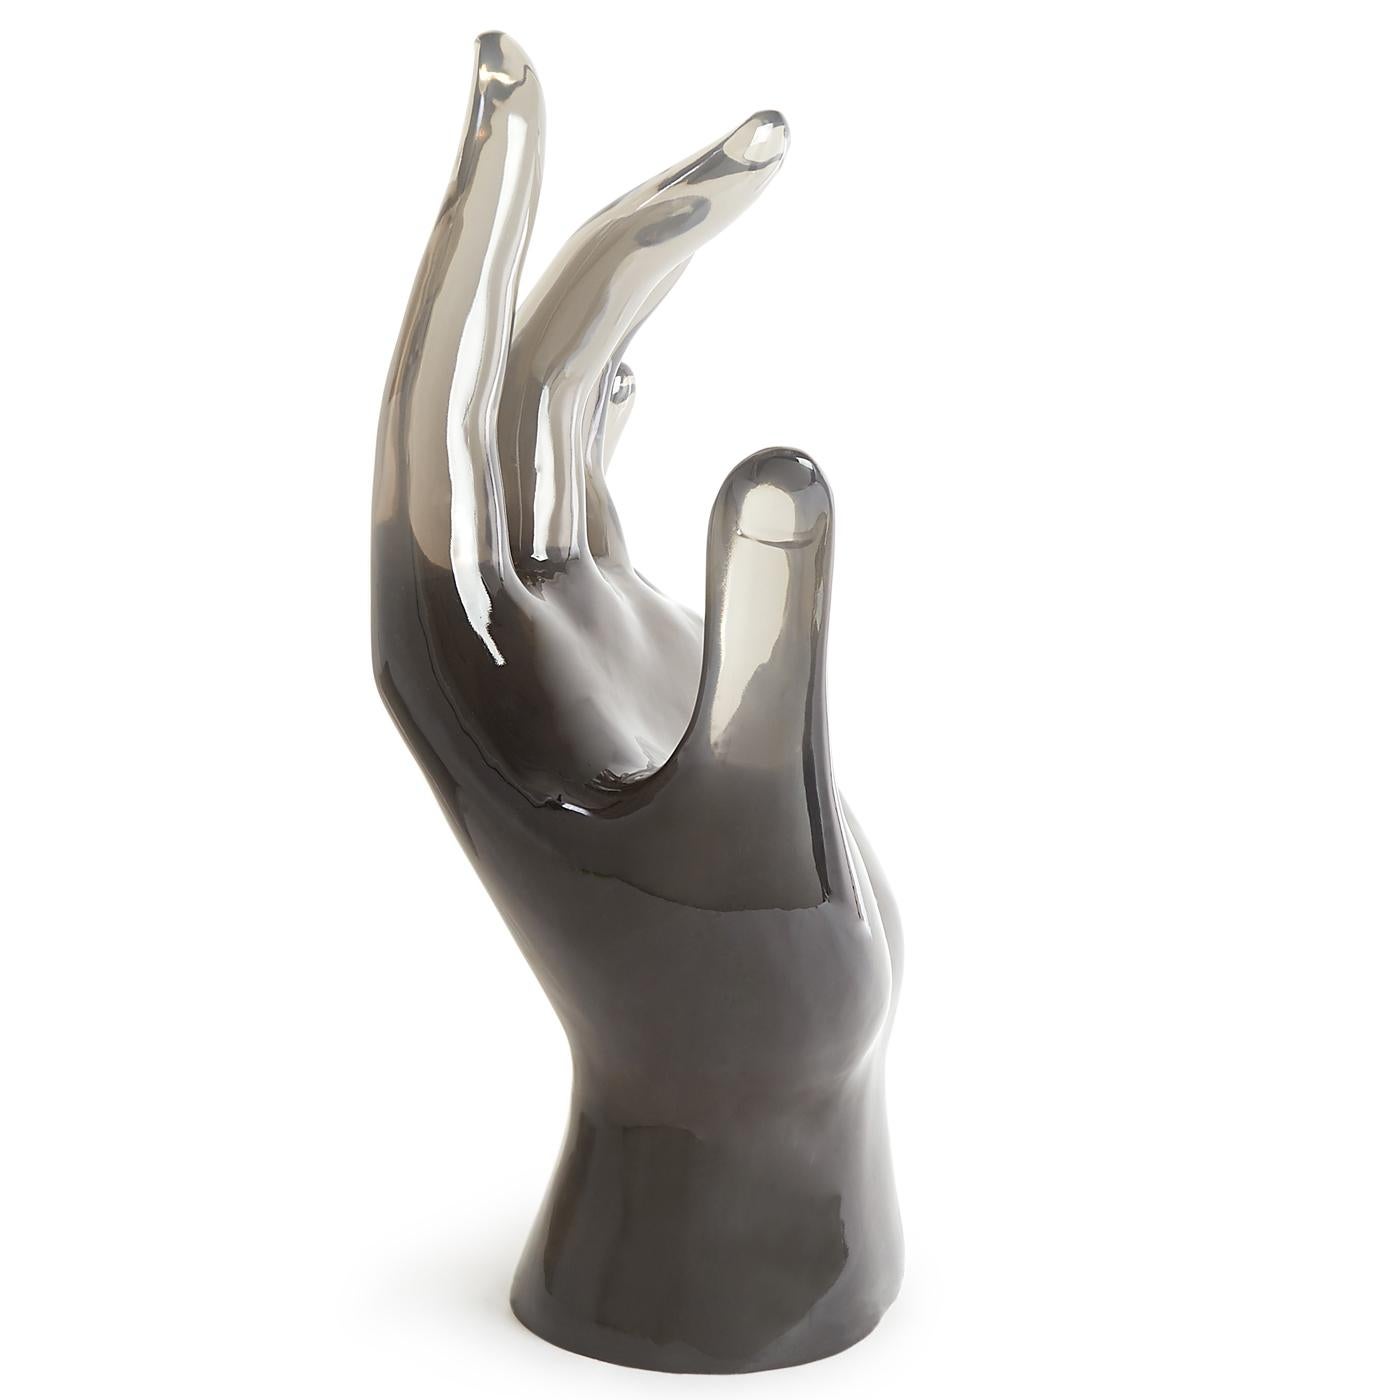 Surreal size. Surprising style beckoning? Let us give you a hand—our giant Lucite hand anchors any tablescape or makes a great focal point in an unused fireplace.

Our oversized acrylic sculptures start their journey in our Soho pottery studio,